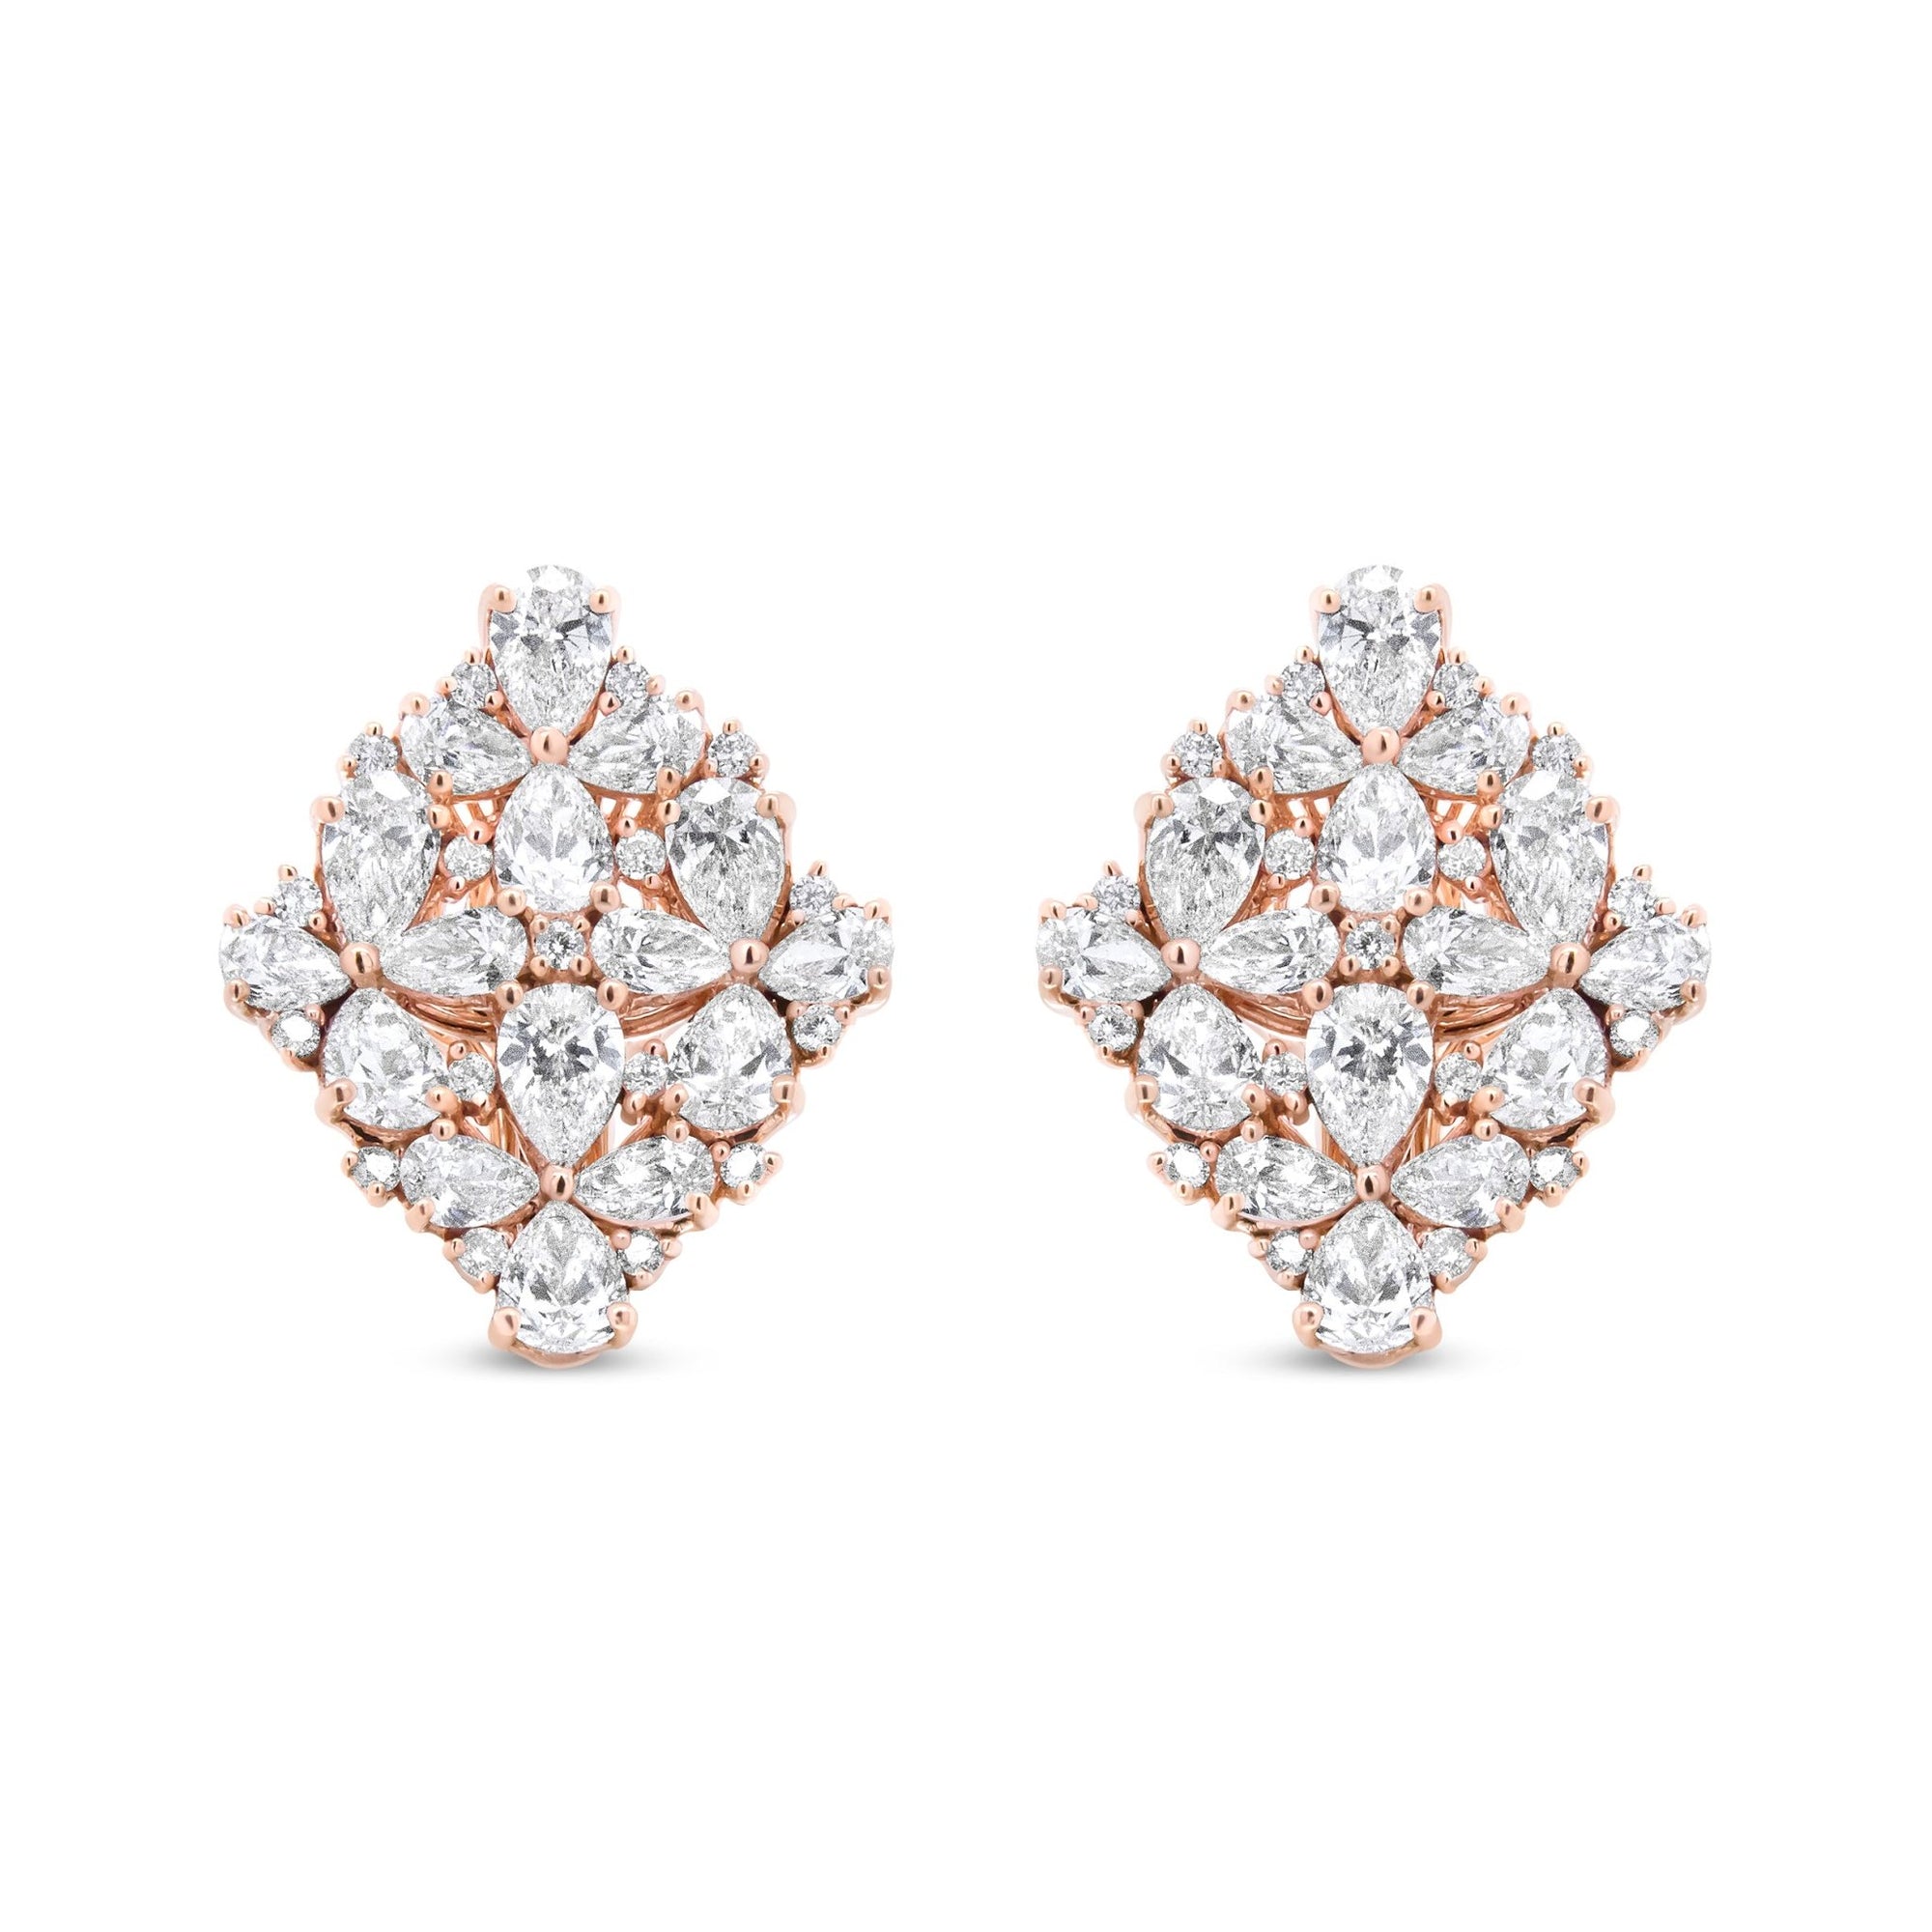 18K Rose Gold 8 1/3 Cttw Pear and Round Diamond Floral Cluster Omega Earrings (F-G Color, VS1-VS2 Clarity) - LinkagejewelrydesignLinkagejewelrydesign